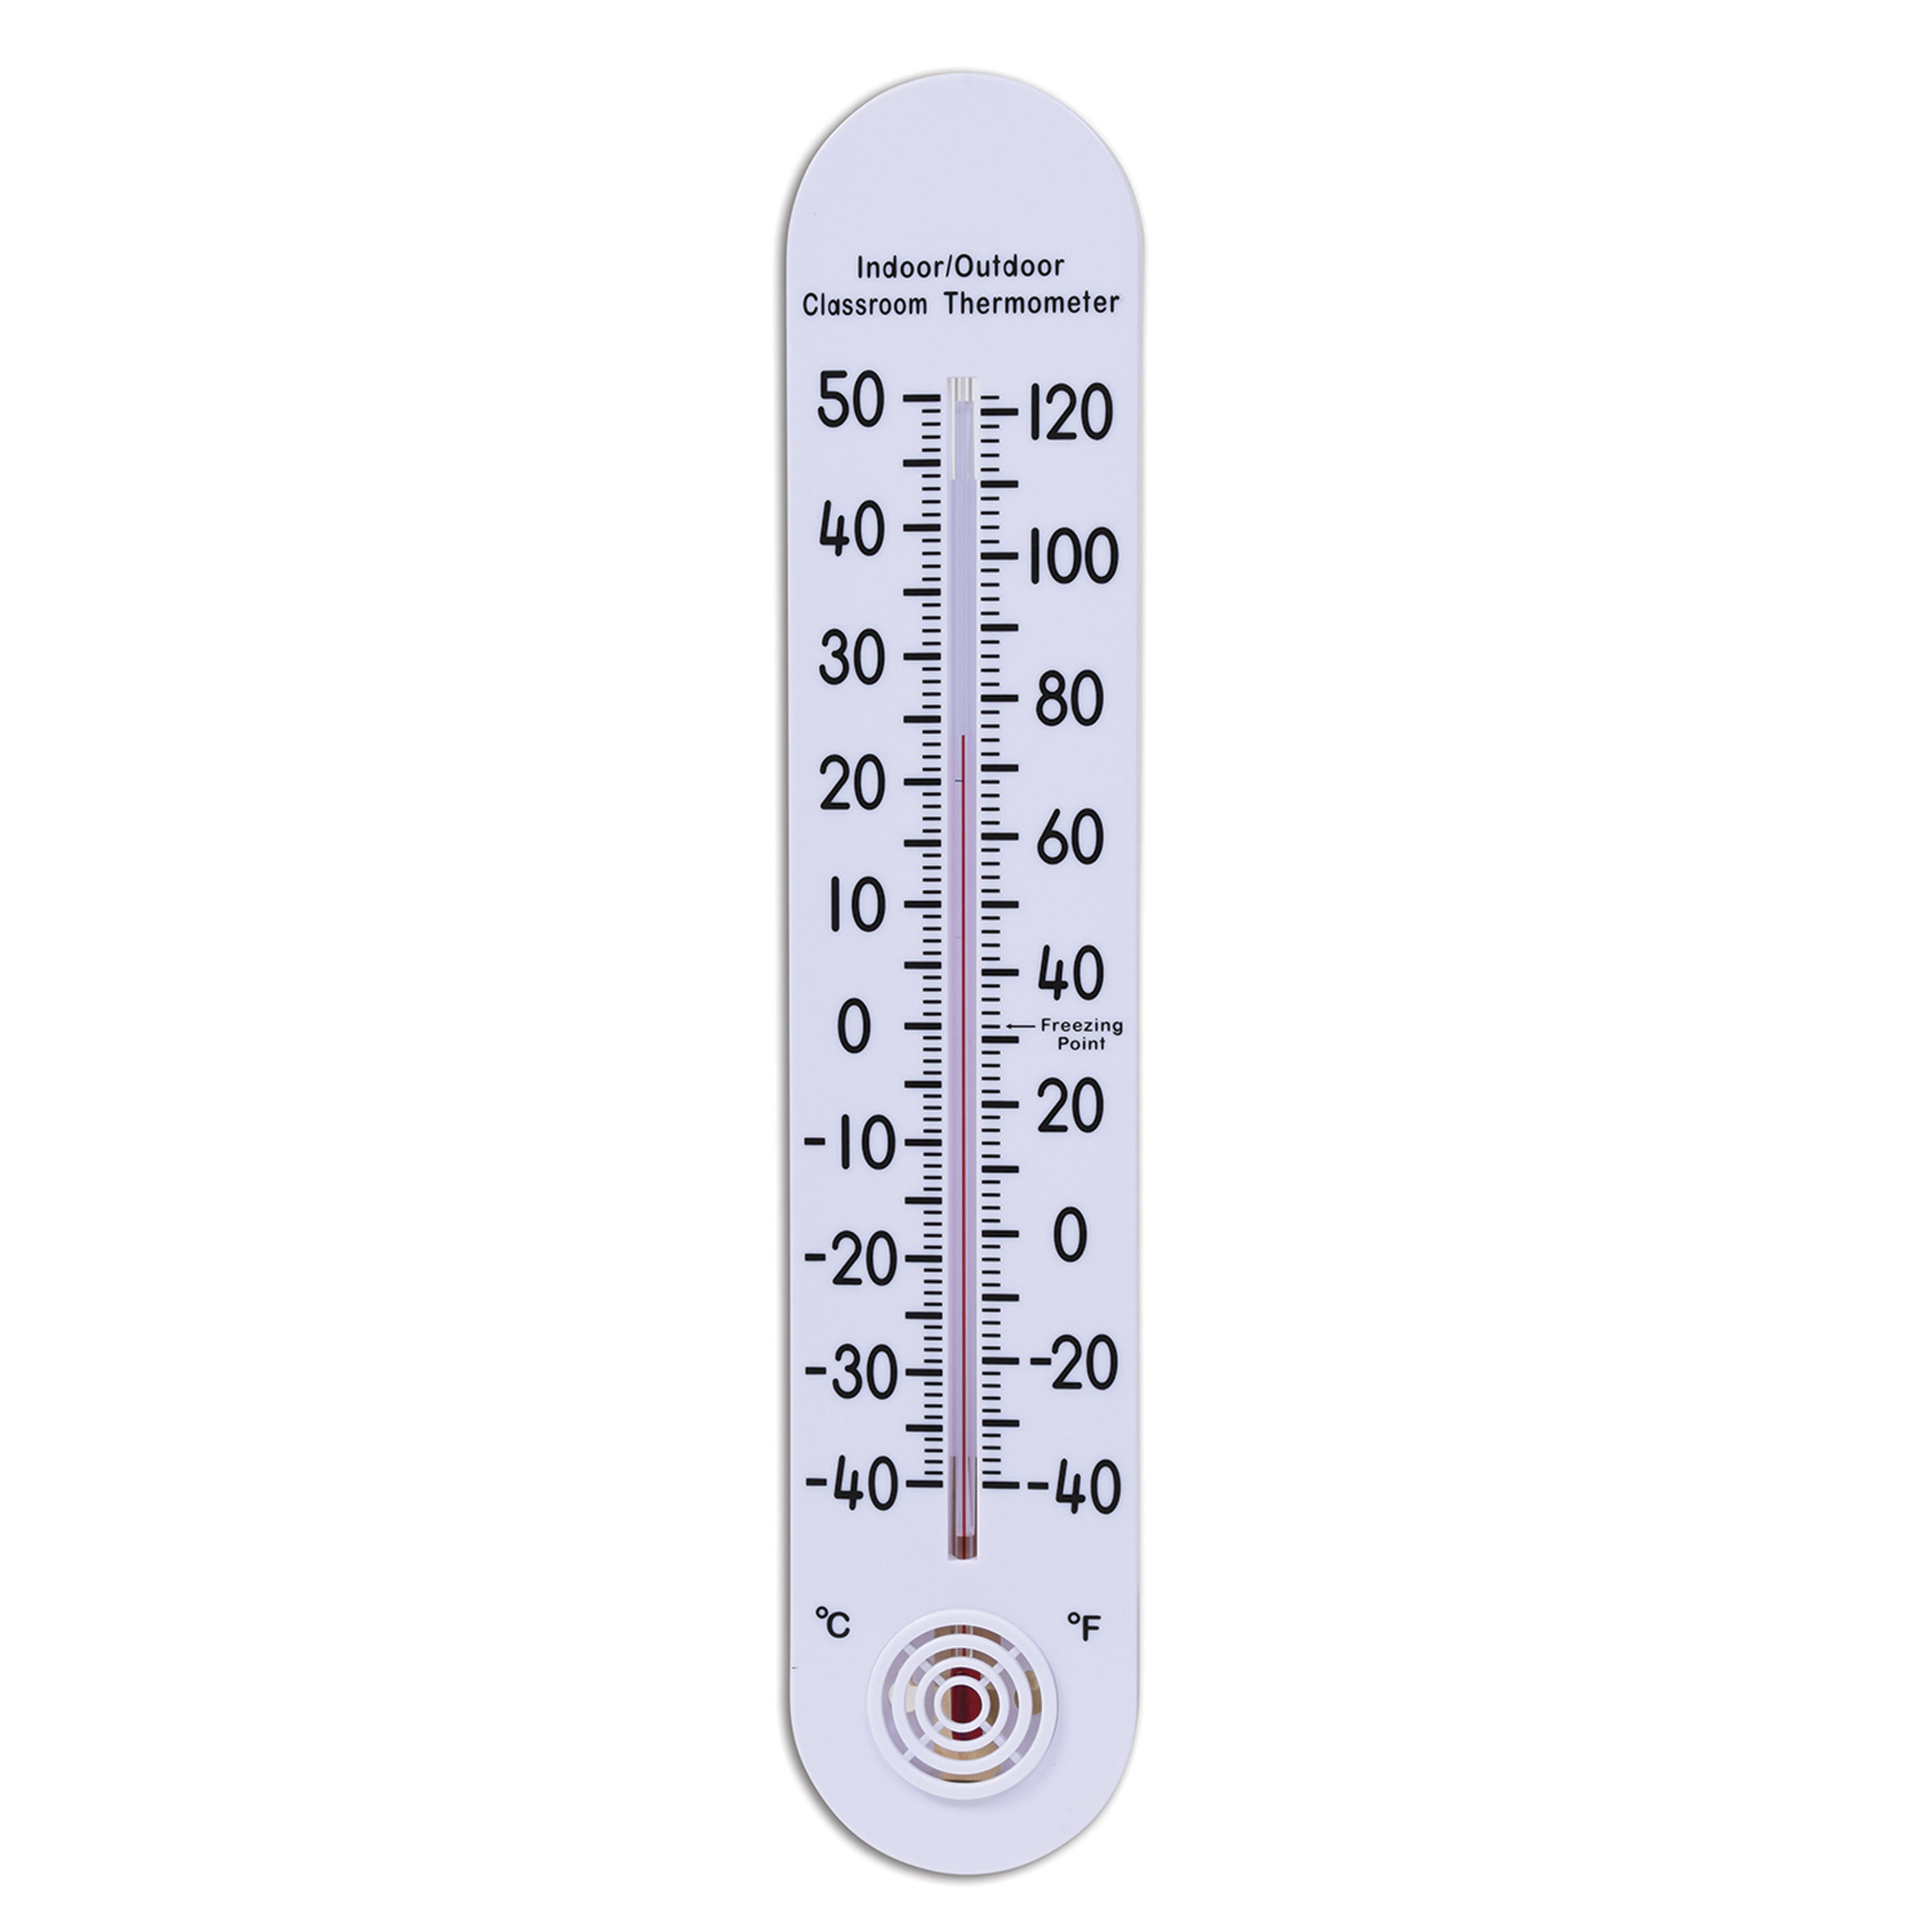 Indoor/Outdoor Wall Office Laboratory Home Garage Temperature Thermometer CY 